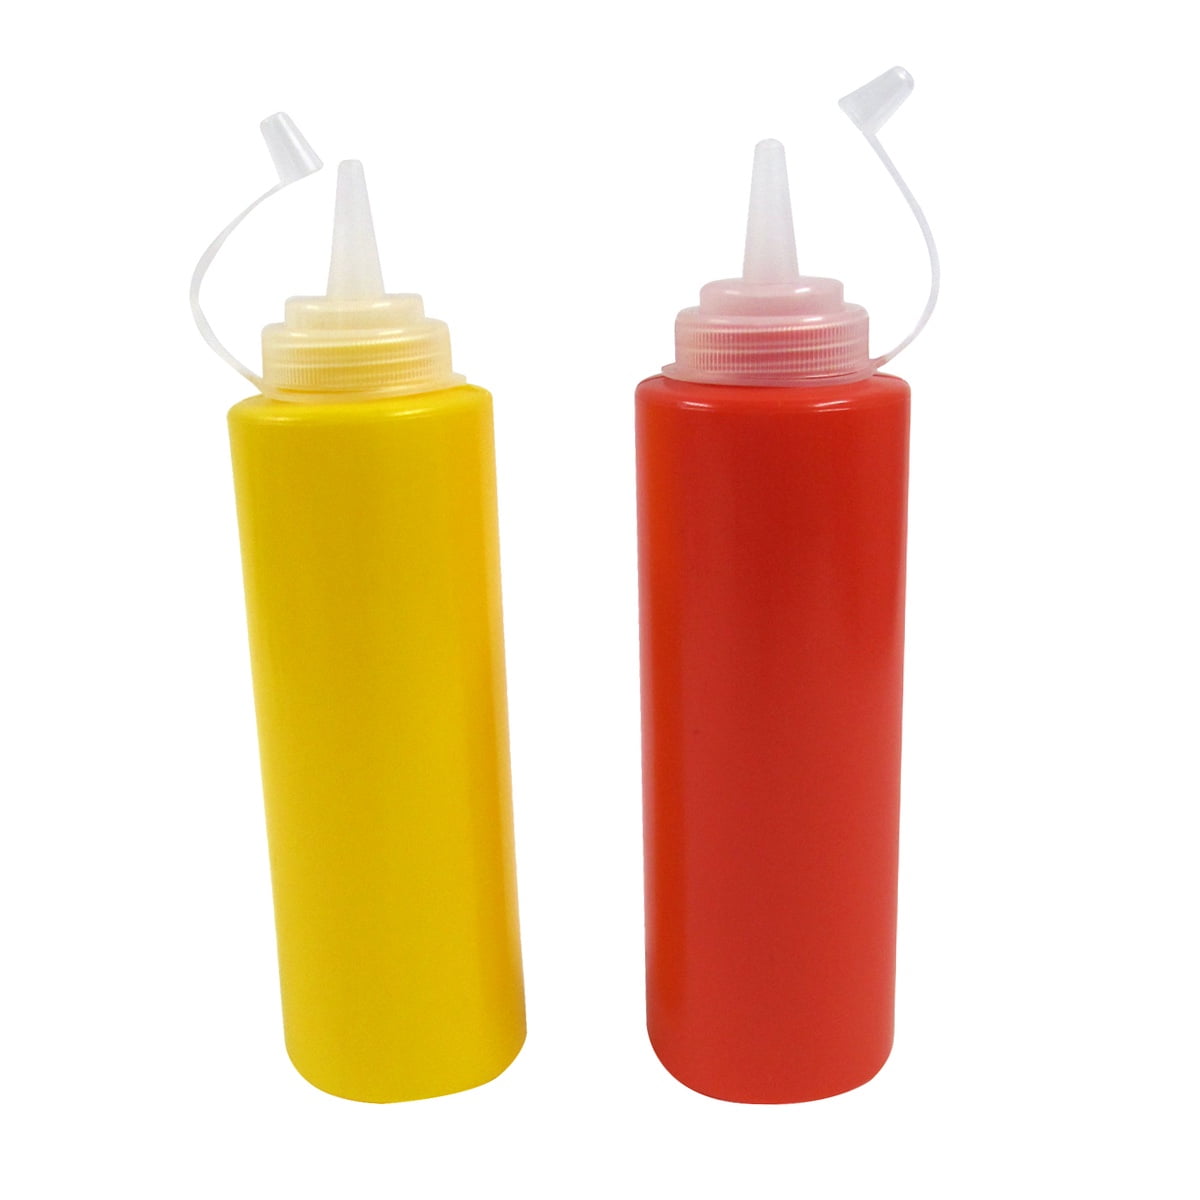 Plastic Clear Squeeze Bottle Condiment Dispenser Ketchup Mustard Sauce YD 